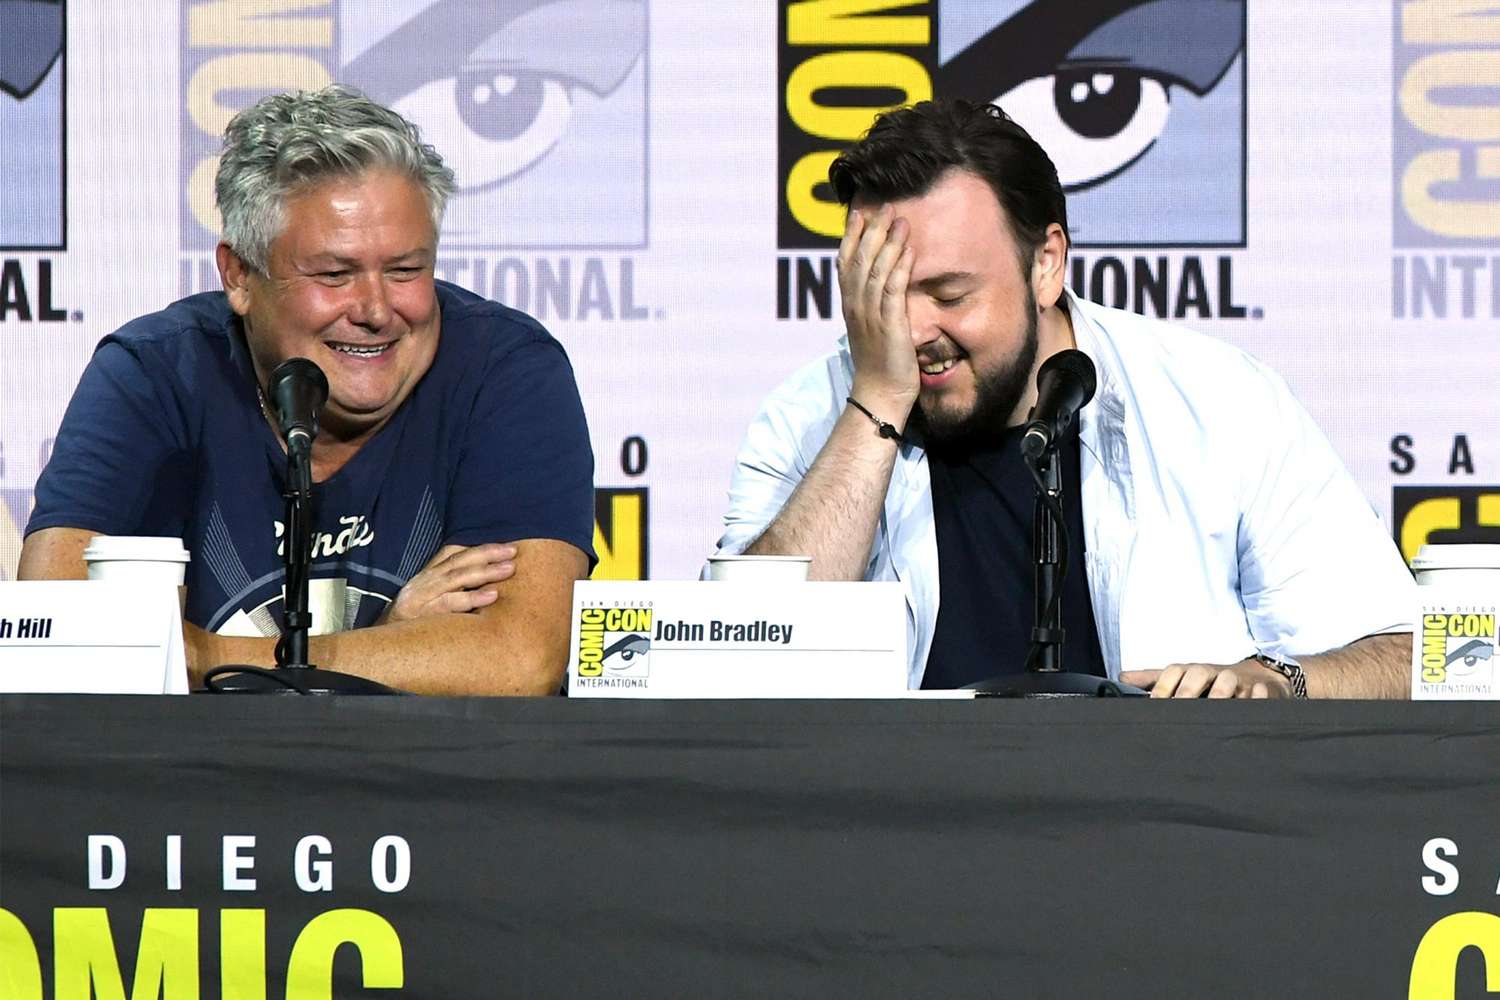 SAN DIEGO, CALIFORNIA - JULY 19: (L-R) Conleth Hill, John Bradley, Maisie Williams, and Jacob Anderson speak at the "Game Of Thrones" Panel And Q&A during 2019 Comic-Con International at San Diego Convention Center on July 19, 2019 in San Diego, California. (Photo by Kevin Winter/Getty Images)